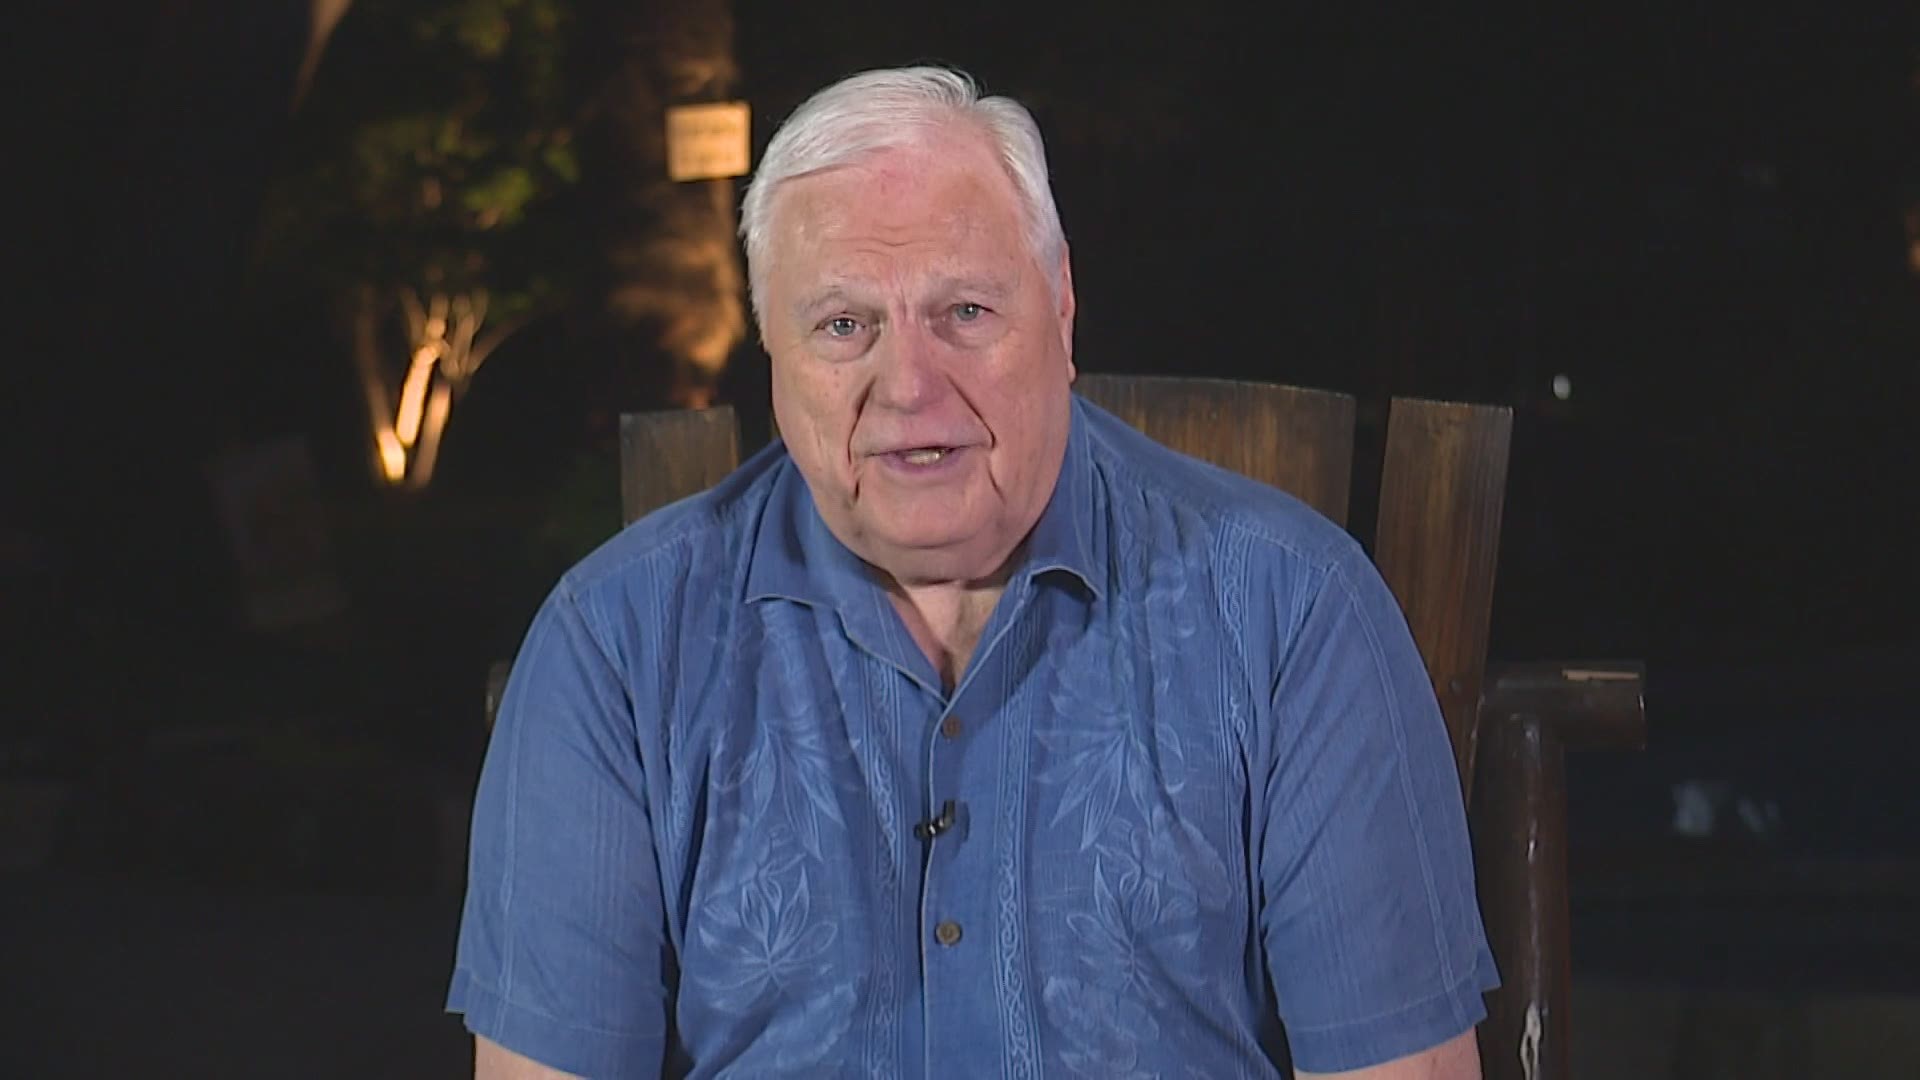 Dale Hansen, the dean of Texas’ sportscasters and one of the most recognized faces in Dallas-Fort Worth television history, has announced he will retire in September